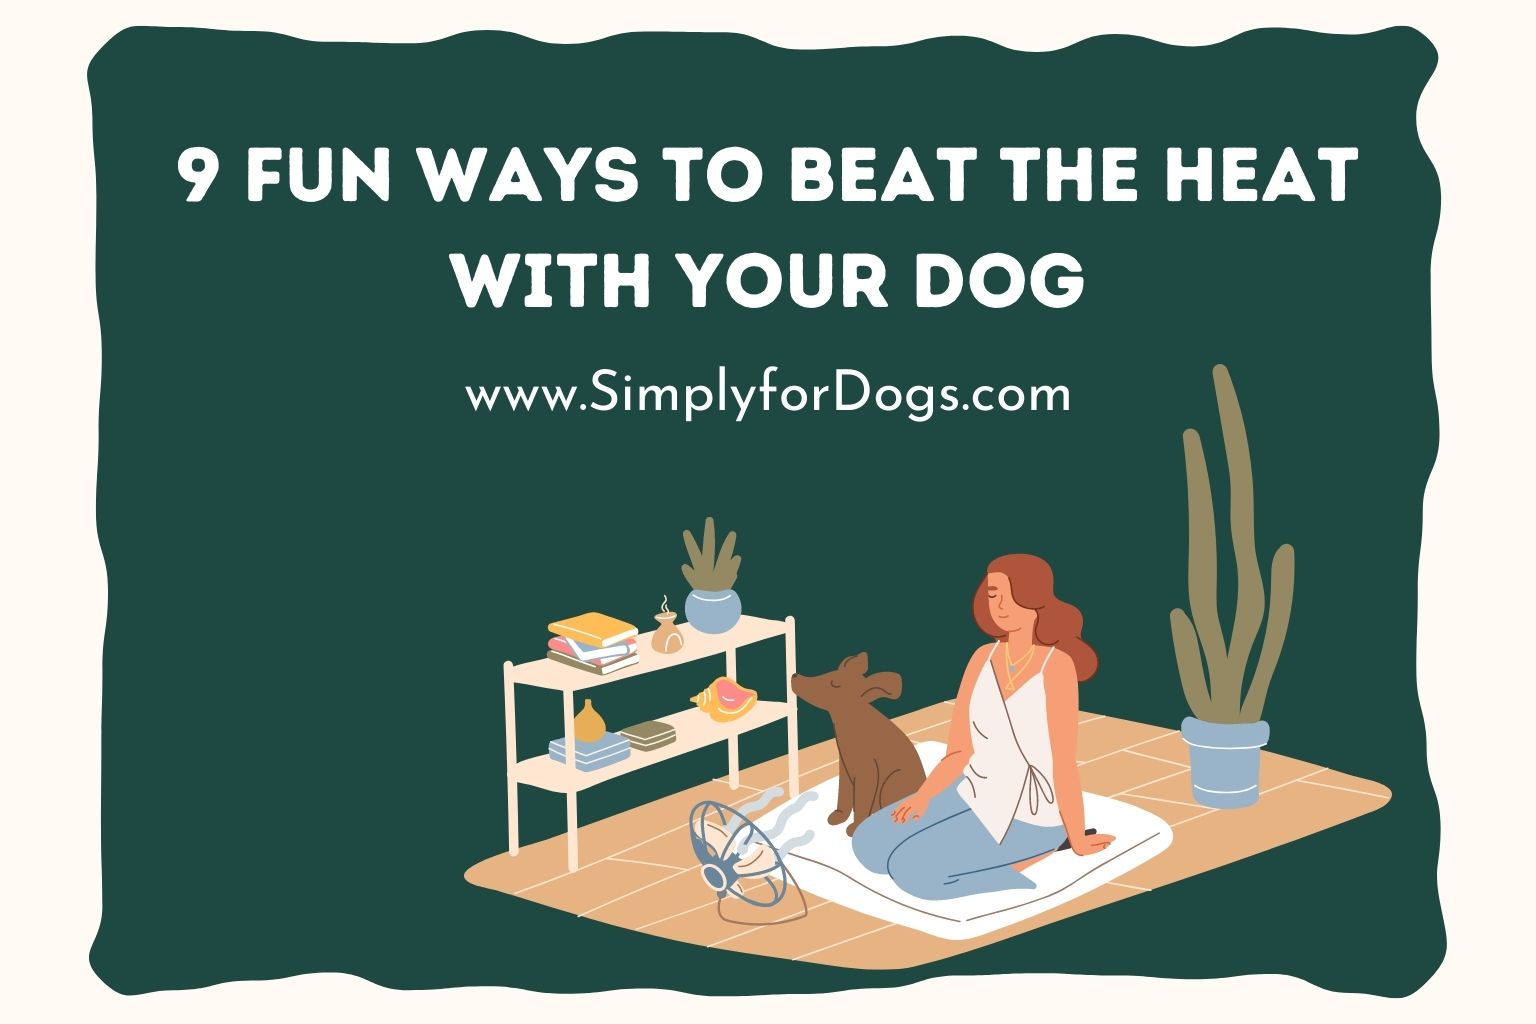 9 Fun Ways to Beat the Heat with Your Dog